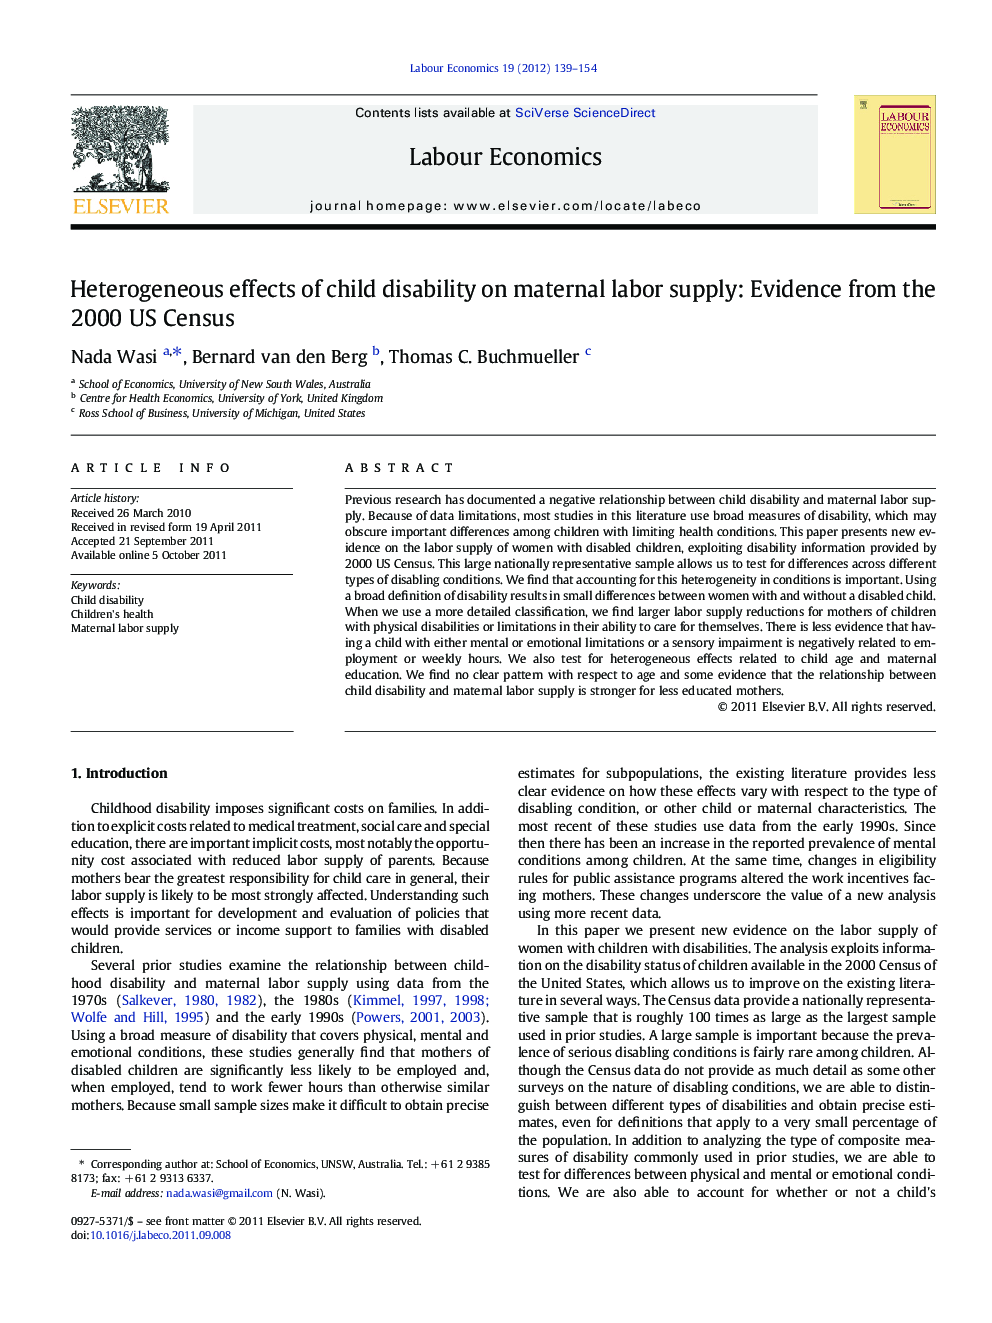 Heterogeneous effects of child disability on maternal labor supply: Evidence from the 2000 US Census